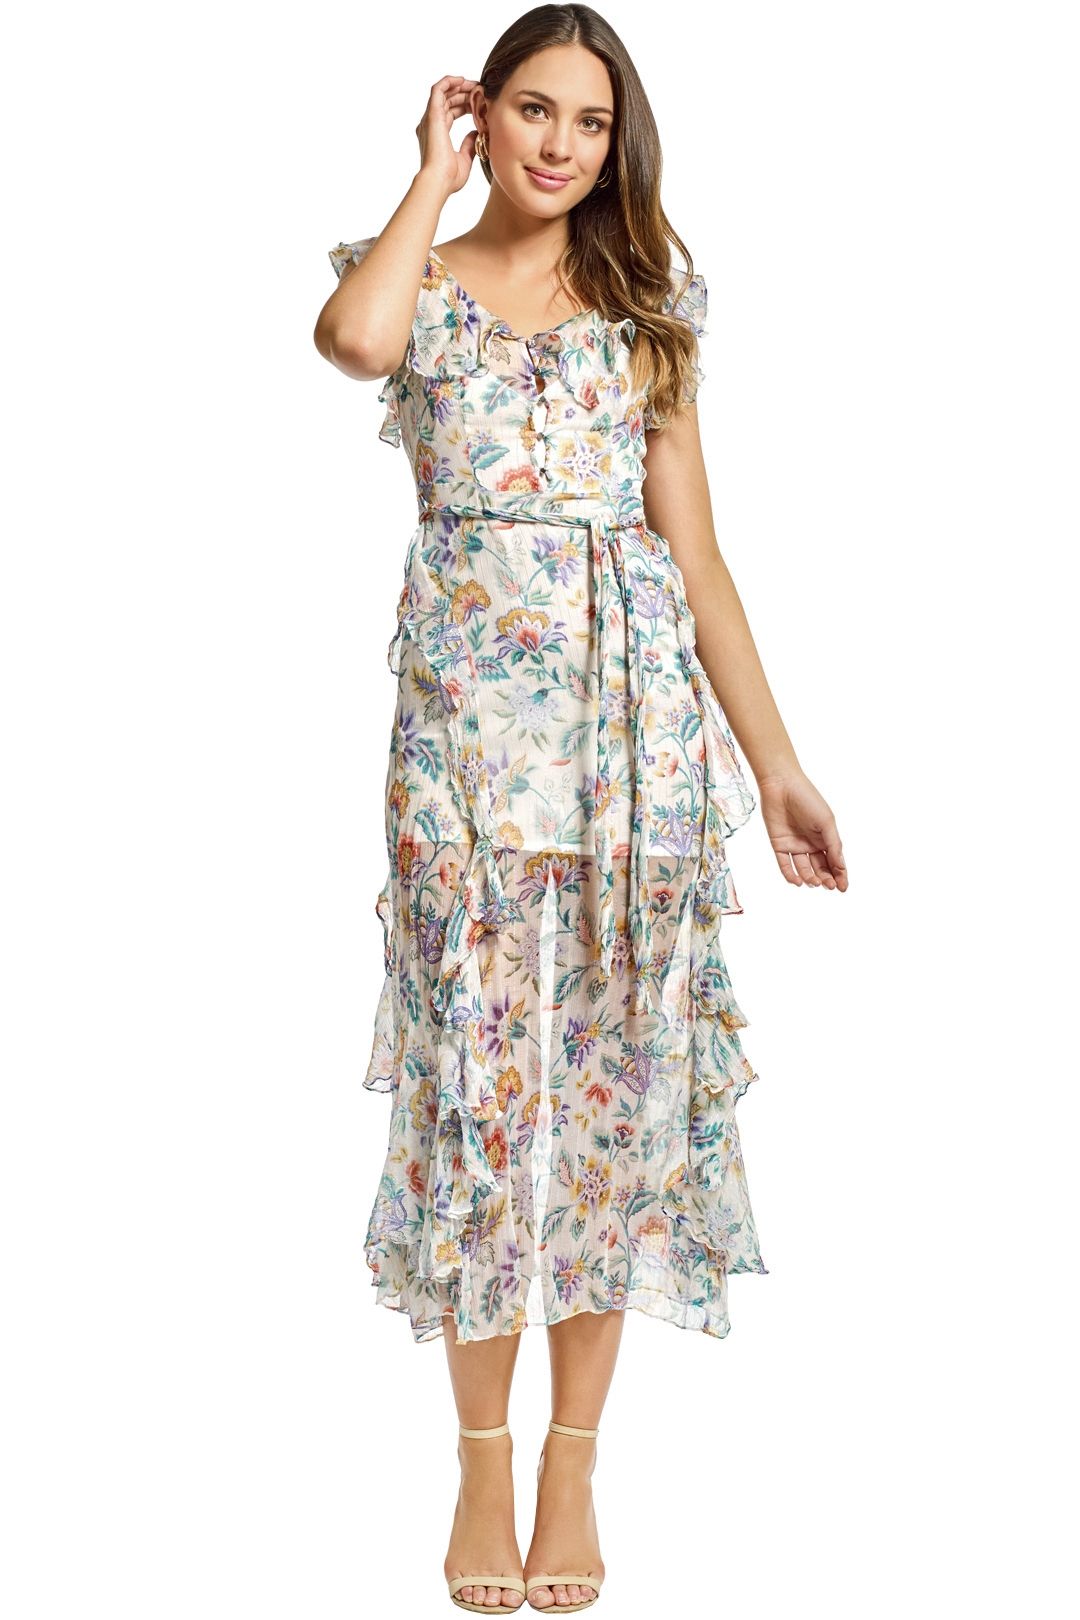 Oh Oh Oh Maxi Dress in Ivory Garden by Alice McCall for Hire